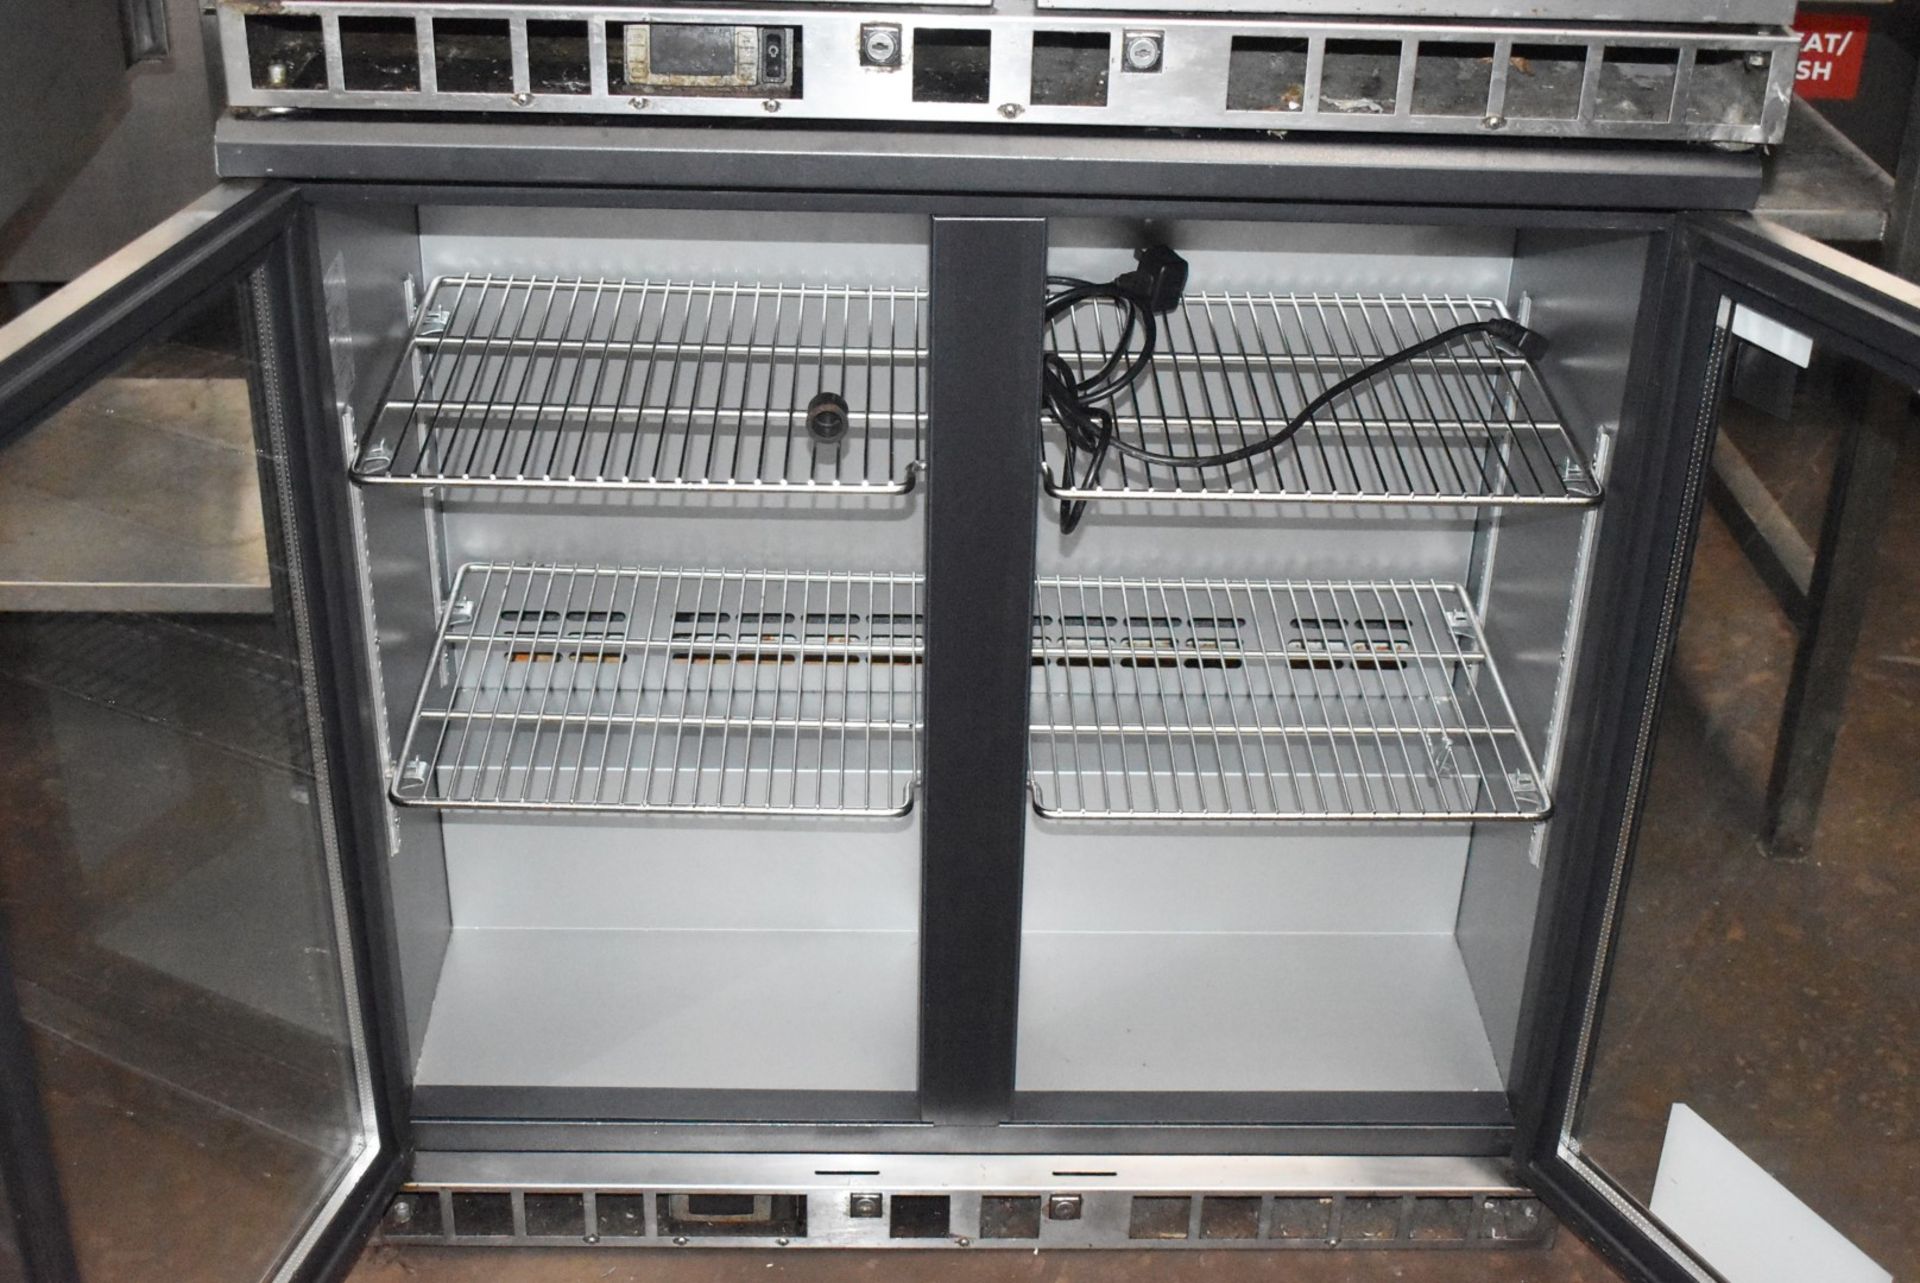 1 x Gamko Bottle Cooler With Double Hinged Stainless Steel Doors - Model MG/250GCS - Original RRP £ - Image 3 of 6